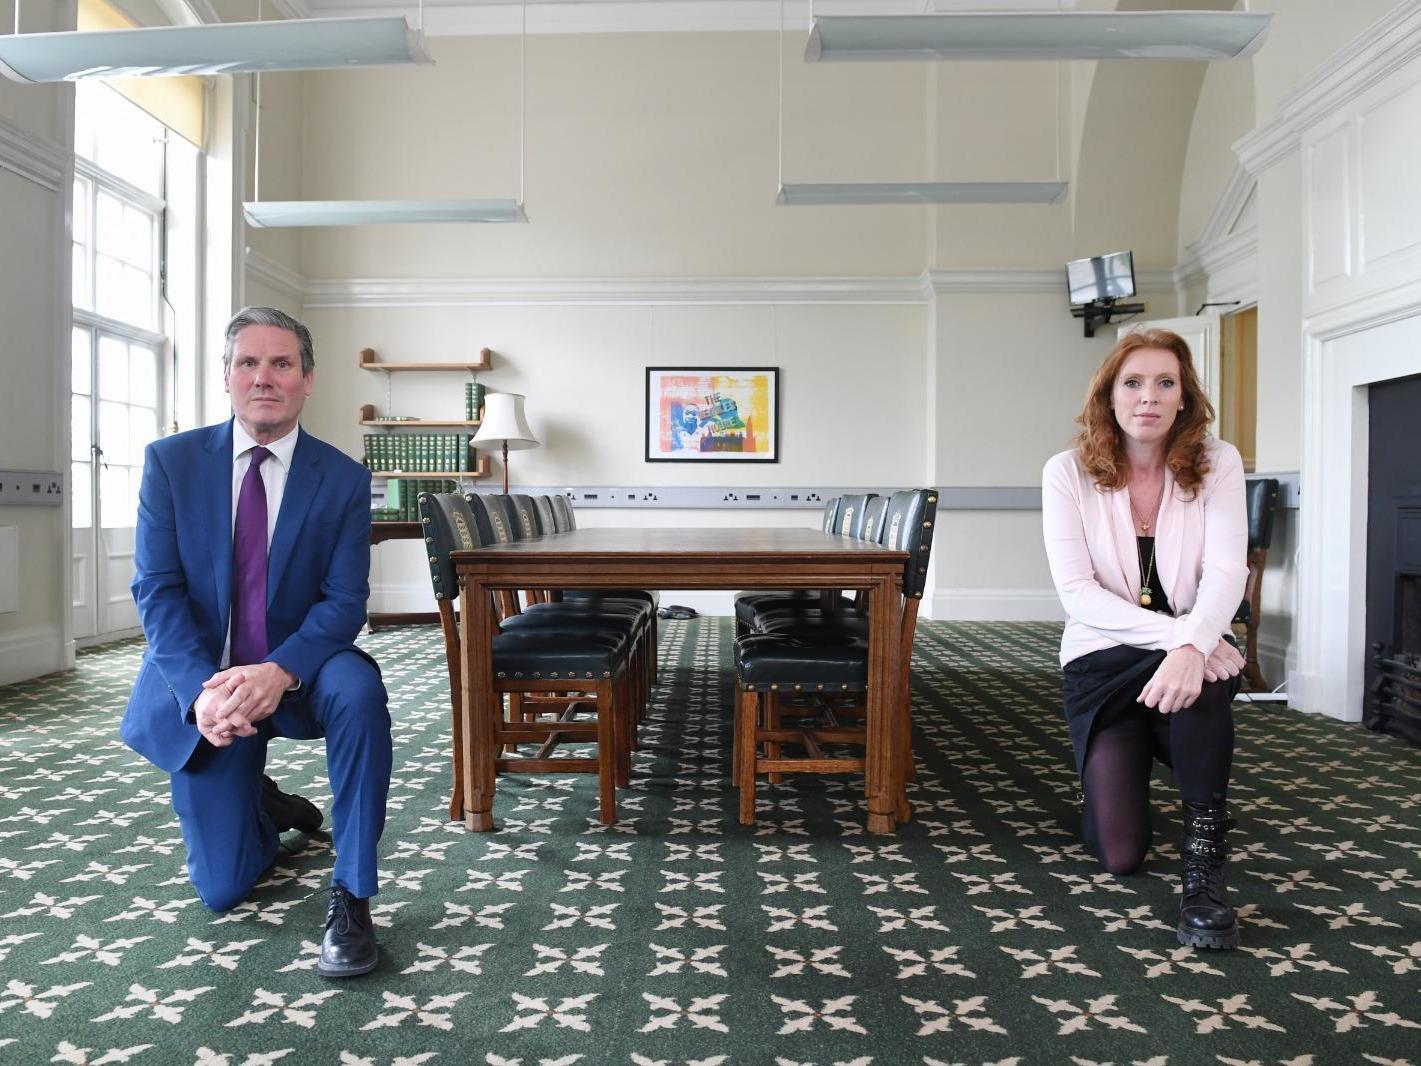 Sir Keir Starmer and deputy Labour leader Angela Rayner adopt the famous protest stance